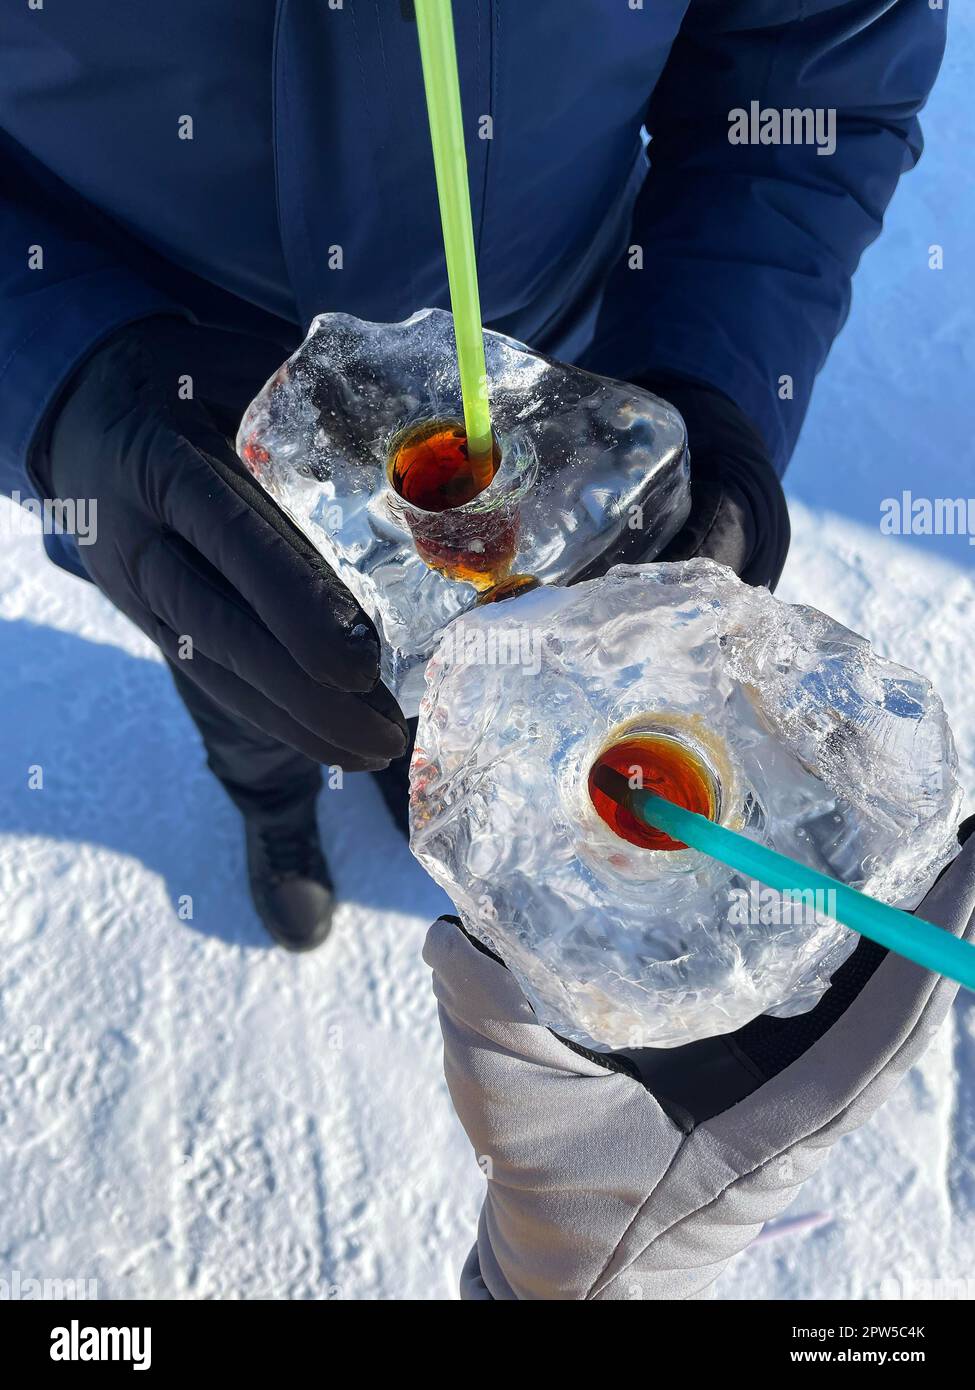 Baikal Ice Bar: man and woman drinking strong alcohol from ice cubes with hole. Popular tourist attraction during winter time aka Baikal Kiss Stock Photo